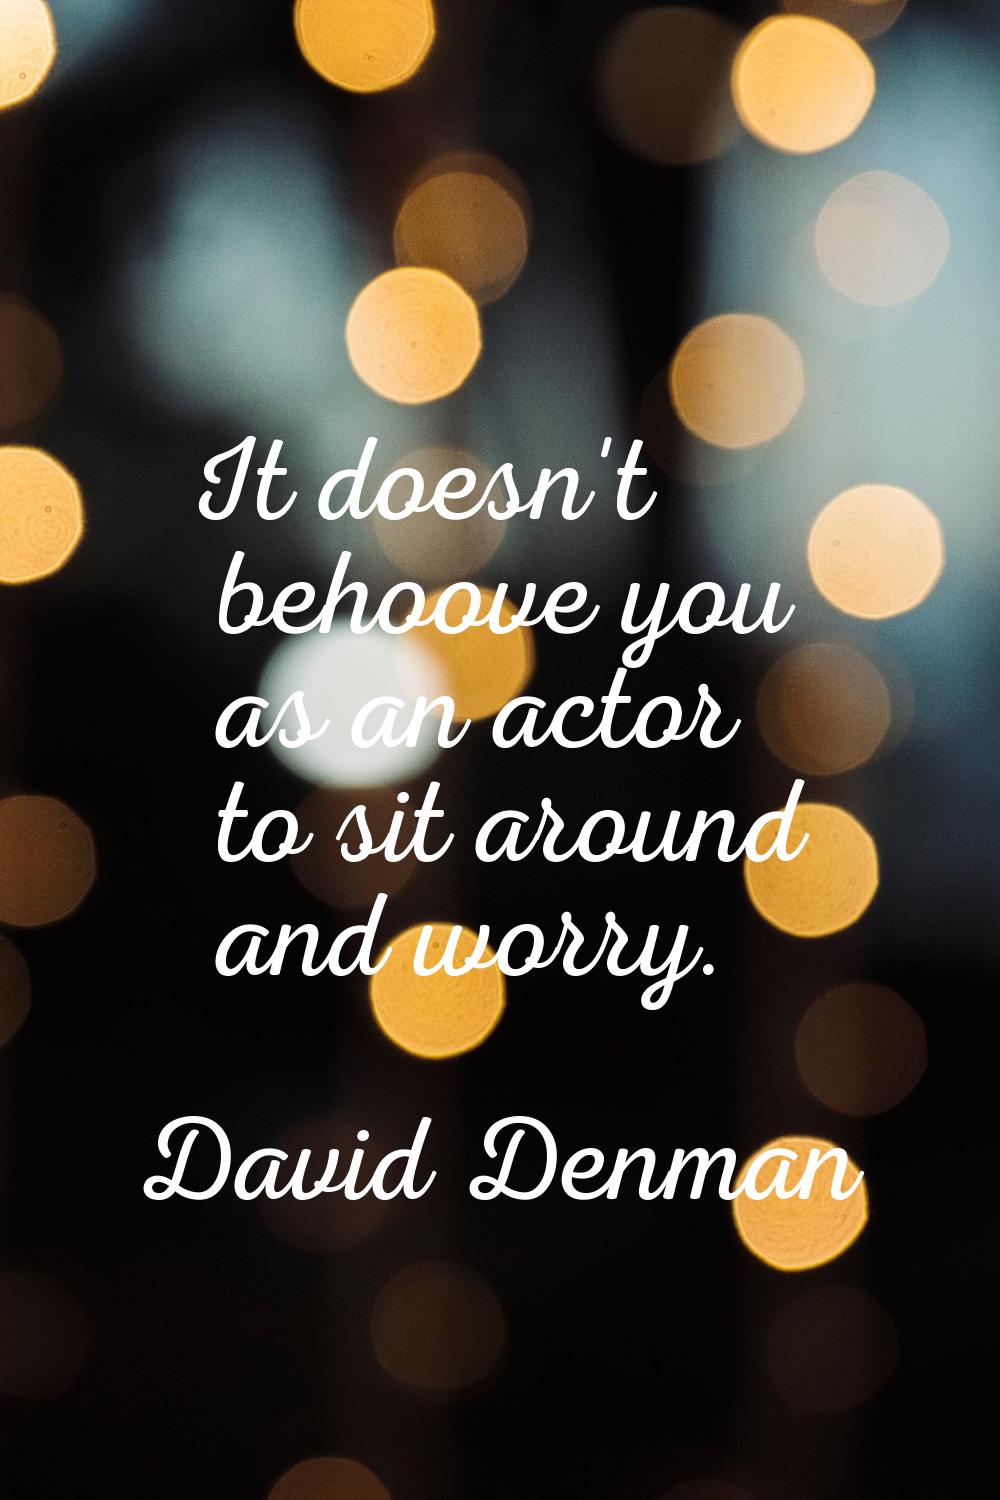 It doesn't behoove you as an actor to sit around and worry.